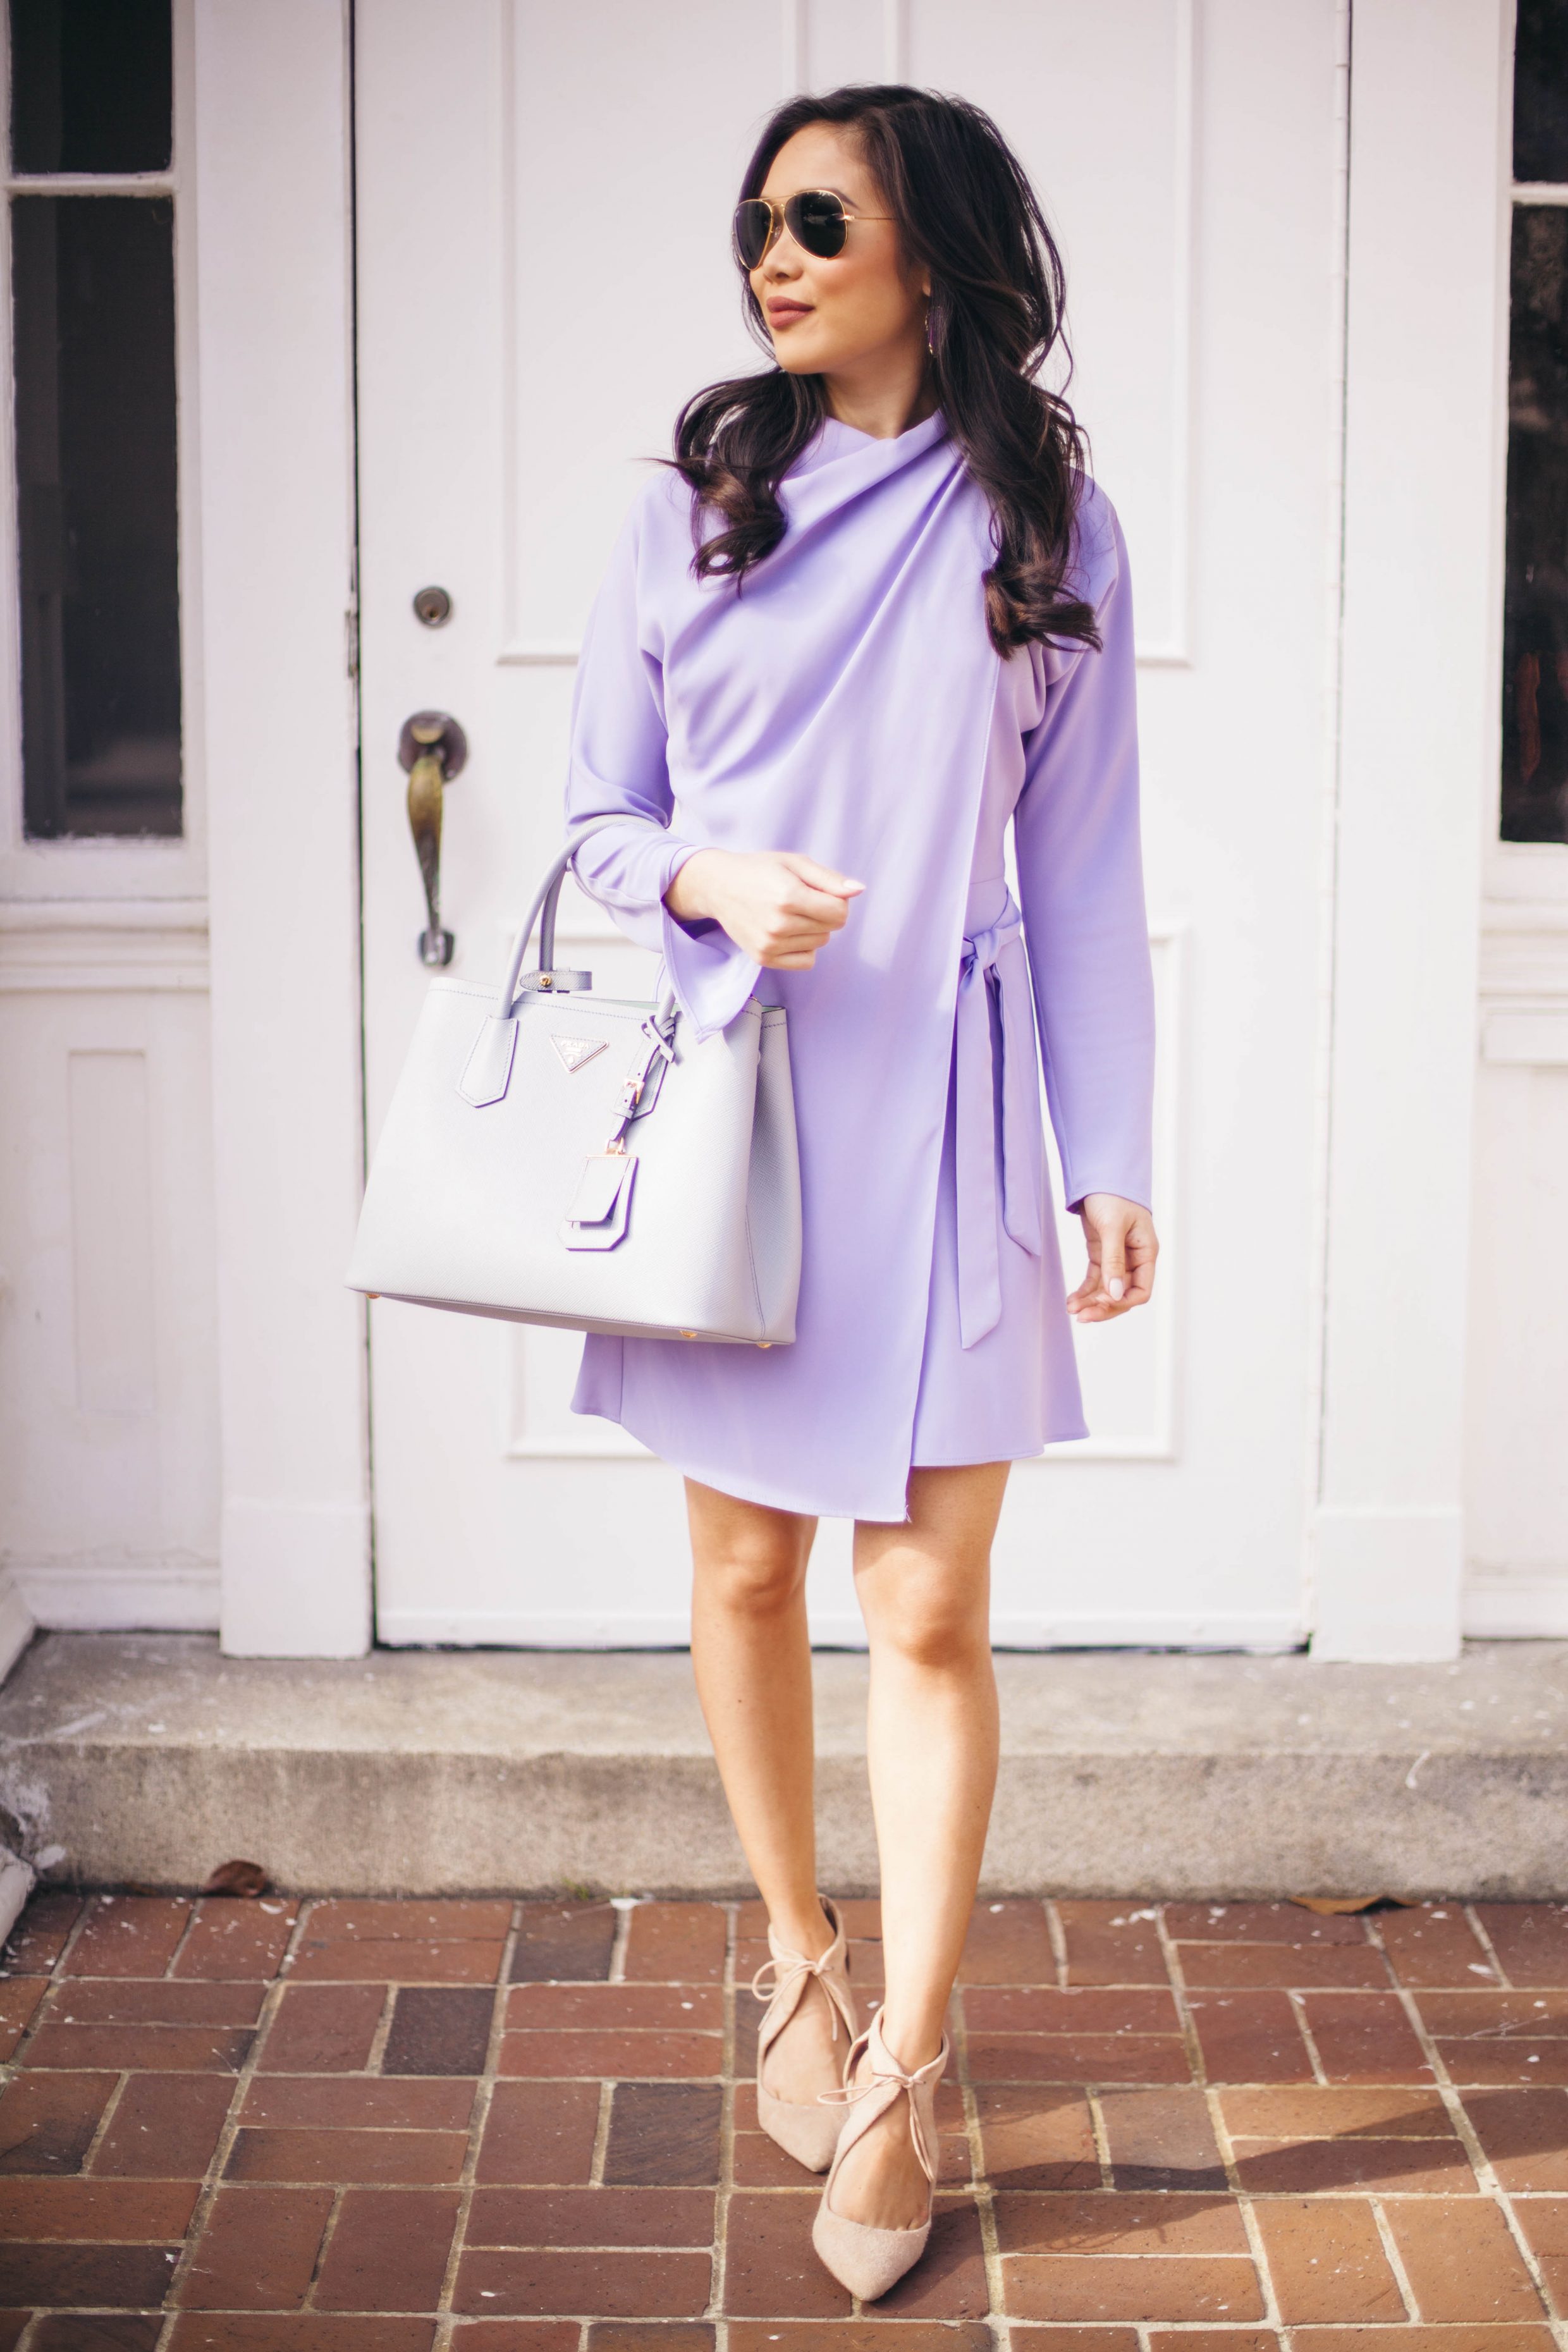 Blogger Hoang-Kim wears a lilac drape dress for spring